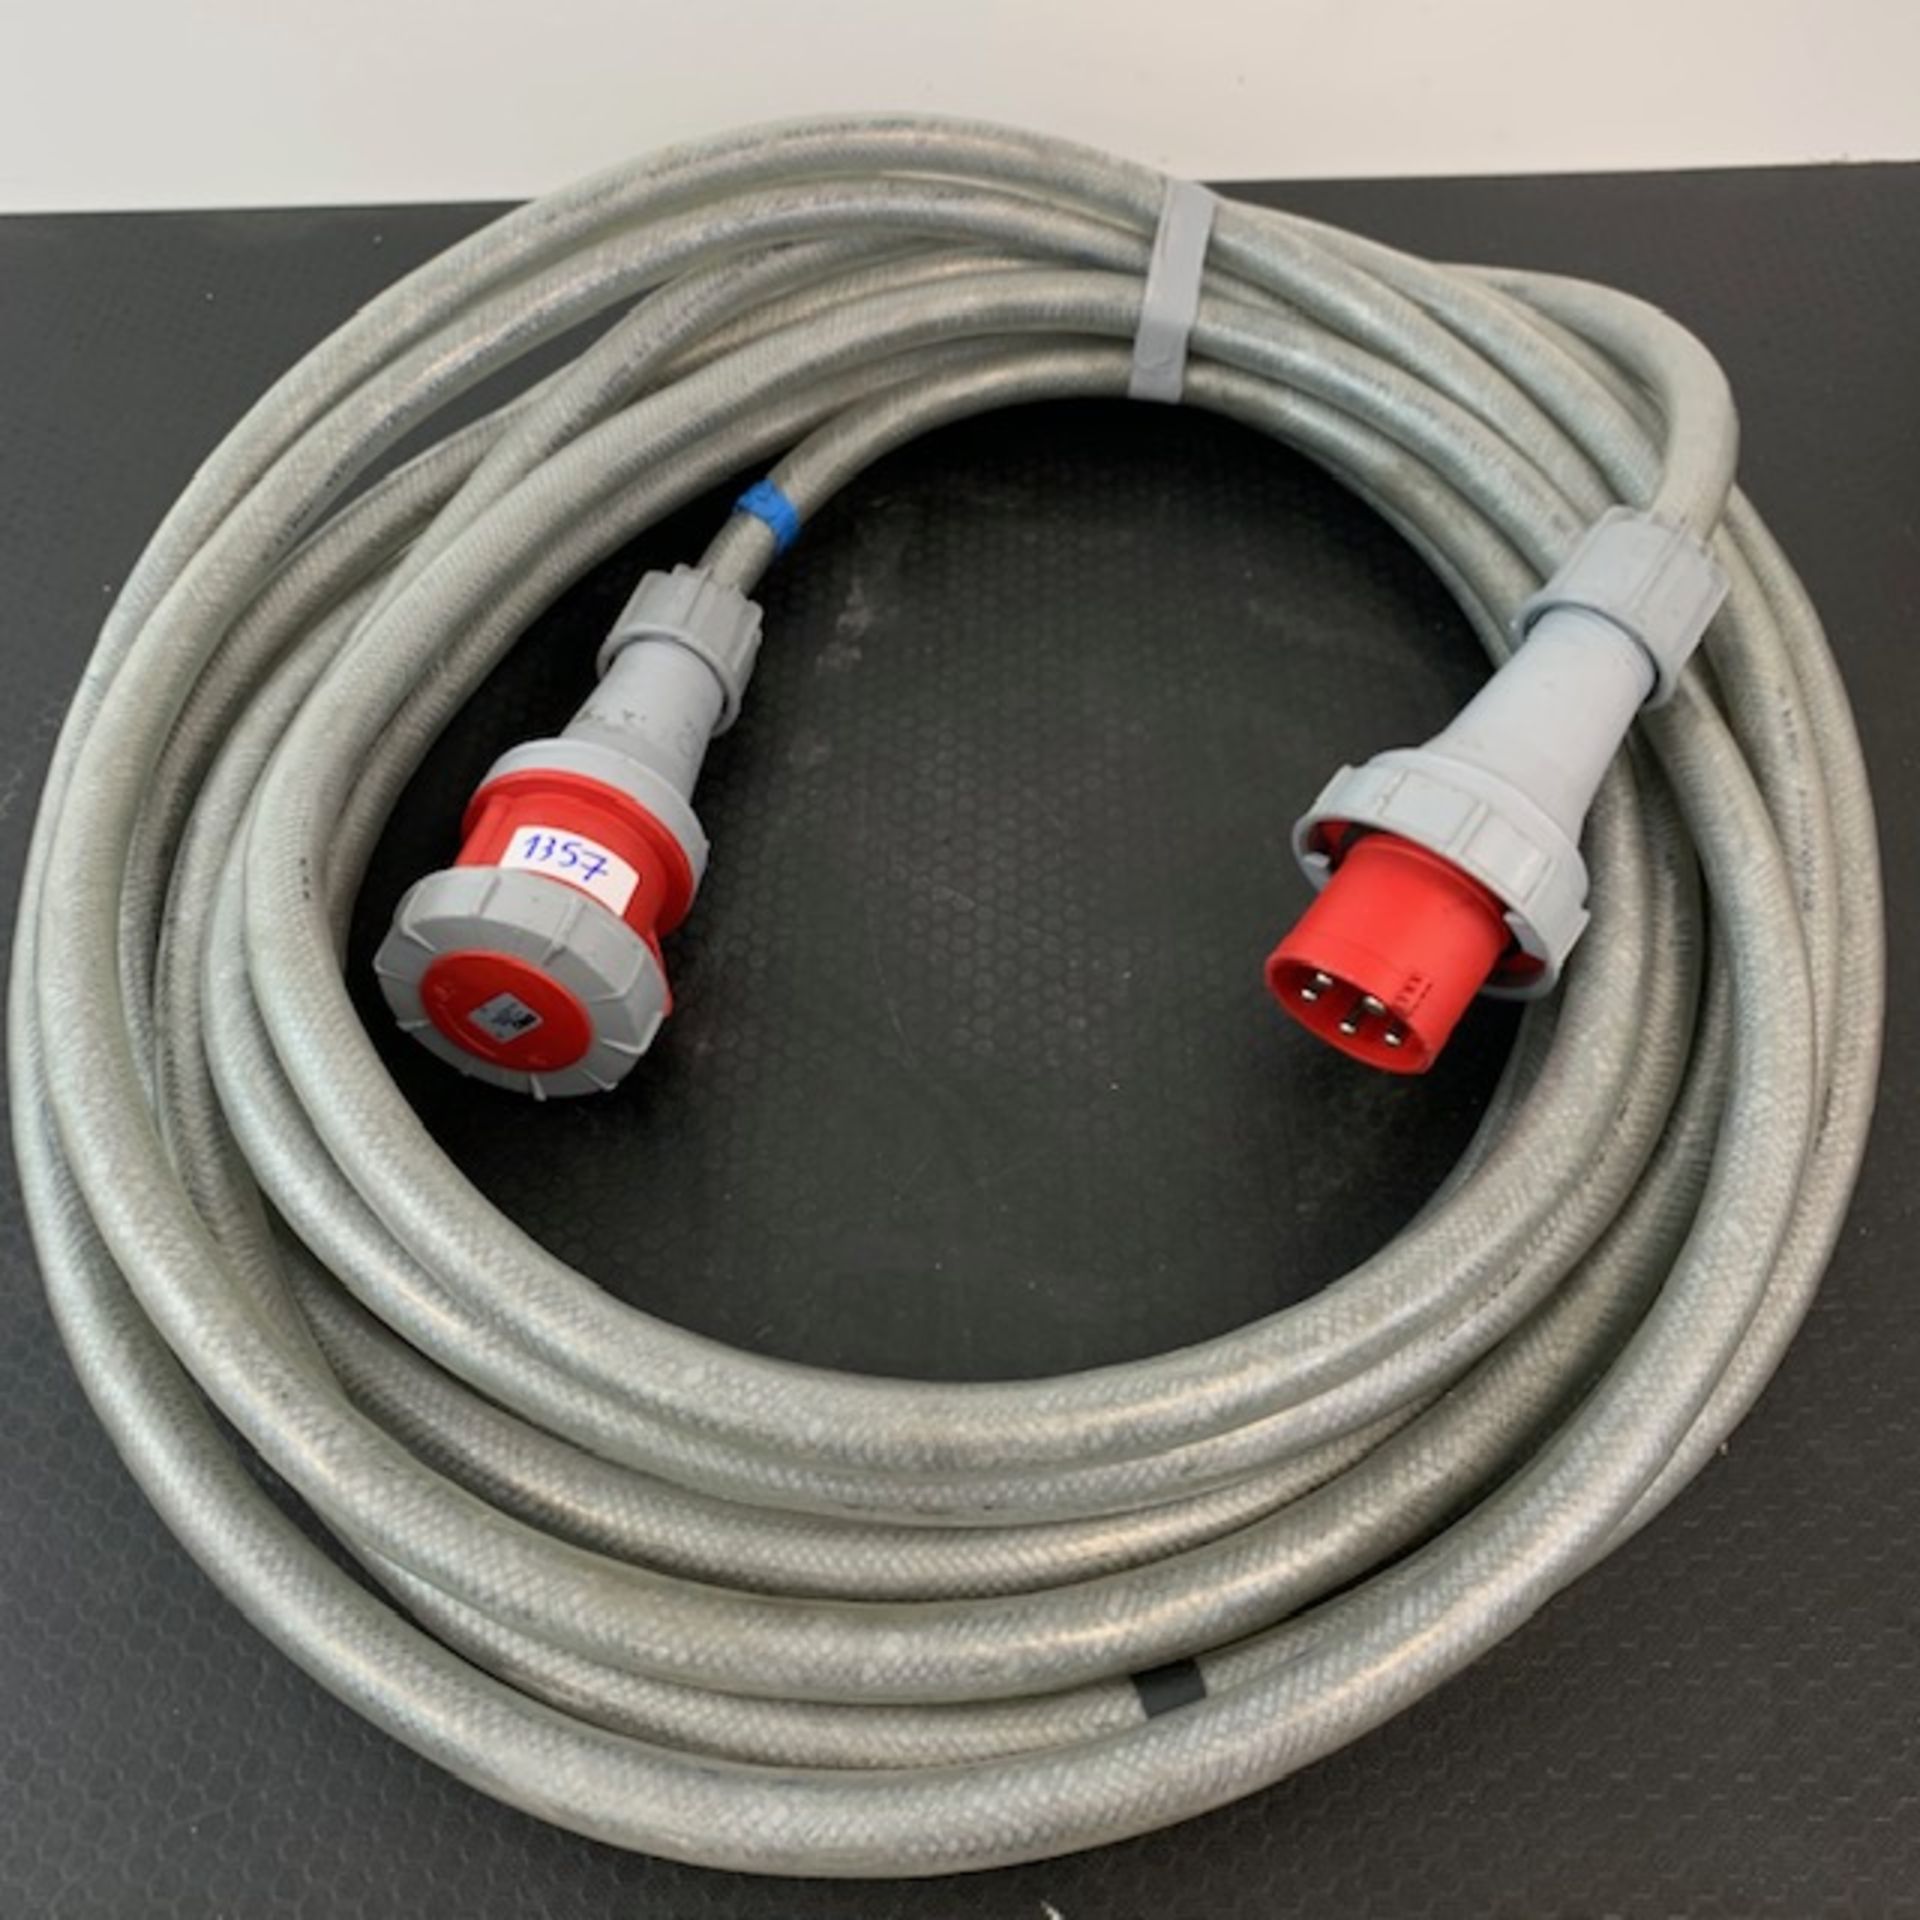 1 X 63Amp 3 Phase 20M Reinforced Cable - Ref: 1357 - CL581 - Location: Altrincham Wa14